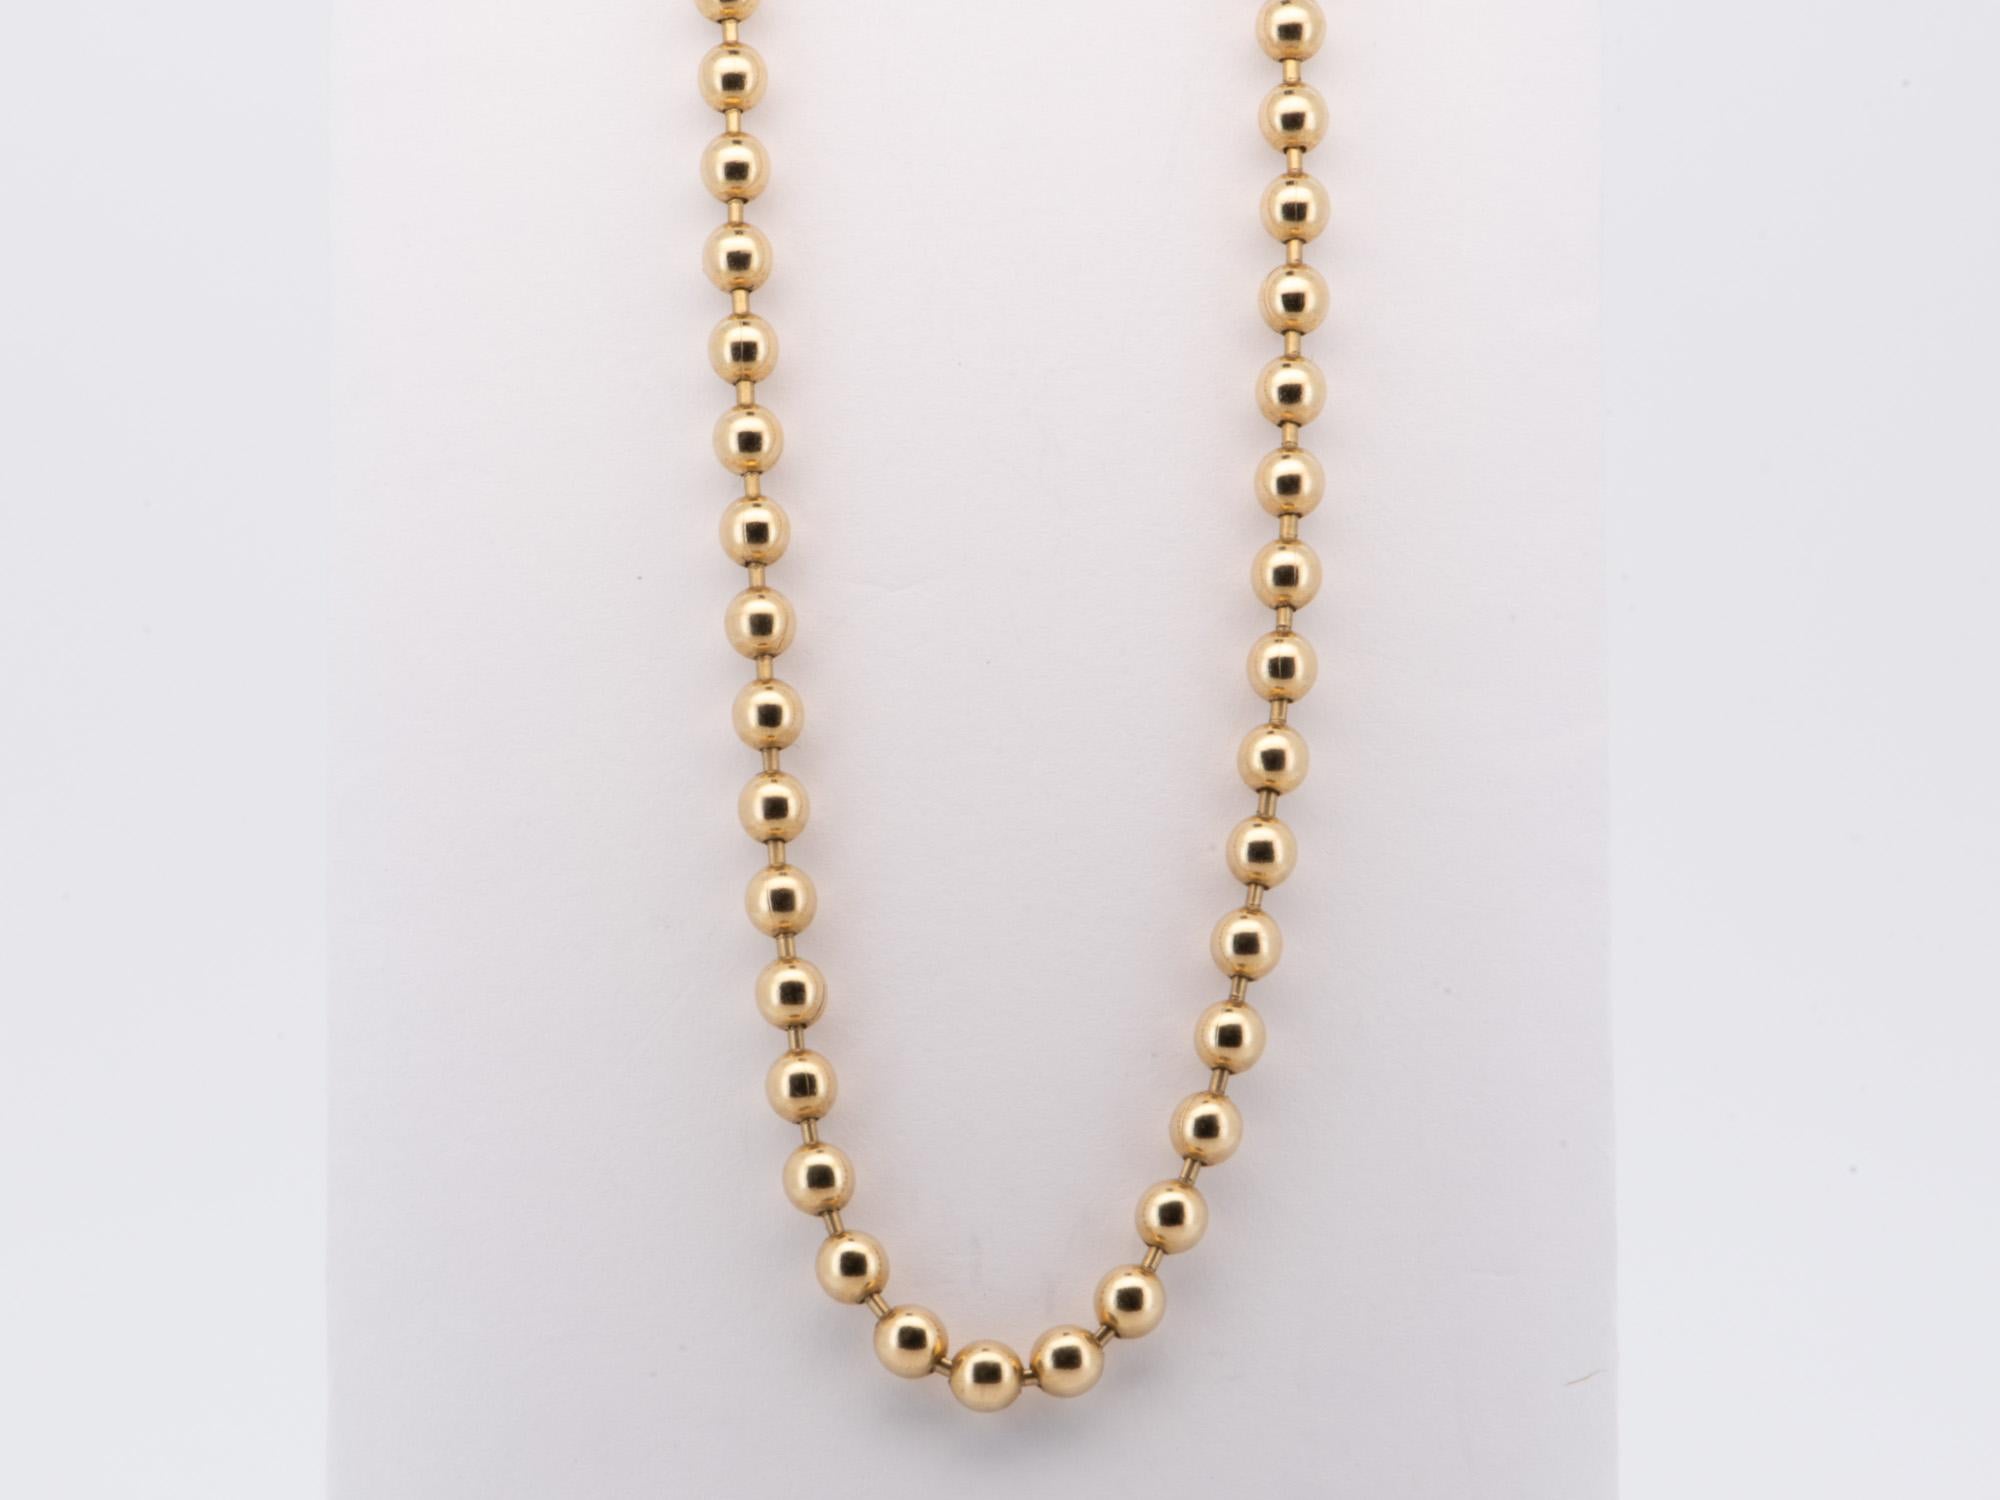 ♥ Gorgeous necklace chain strung with 3mm size gold beads
♥ This necklace features a double-clasp closure, allowing you to connect this to any charm holders, annex links, or other chains easily

♥ Material: 18K gold, over 14g
♥ Length:16.5